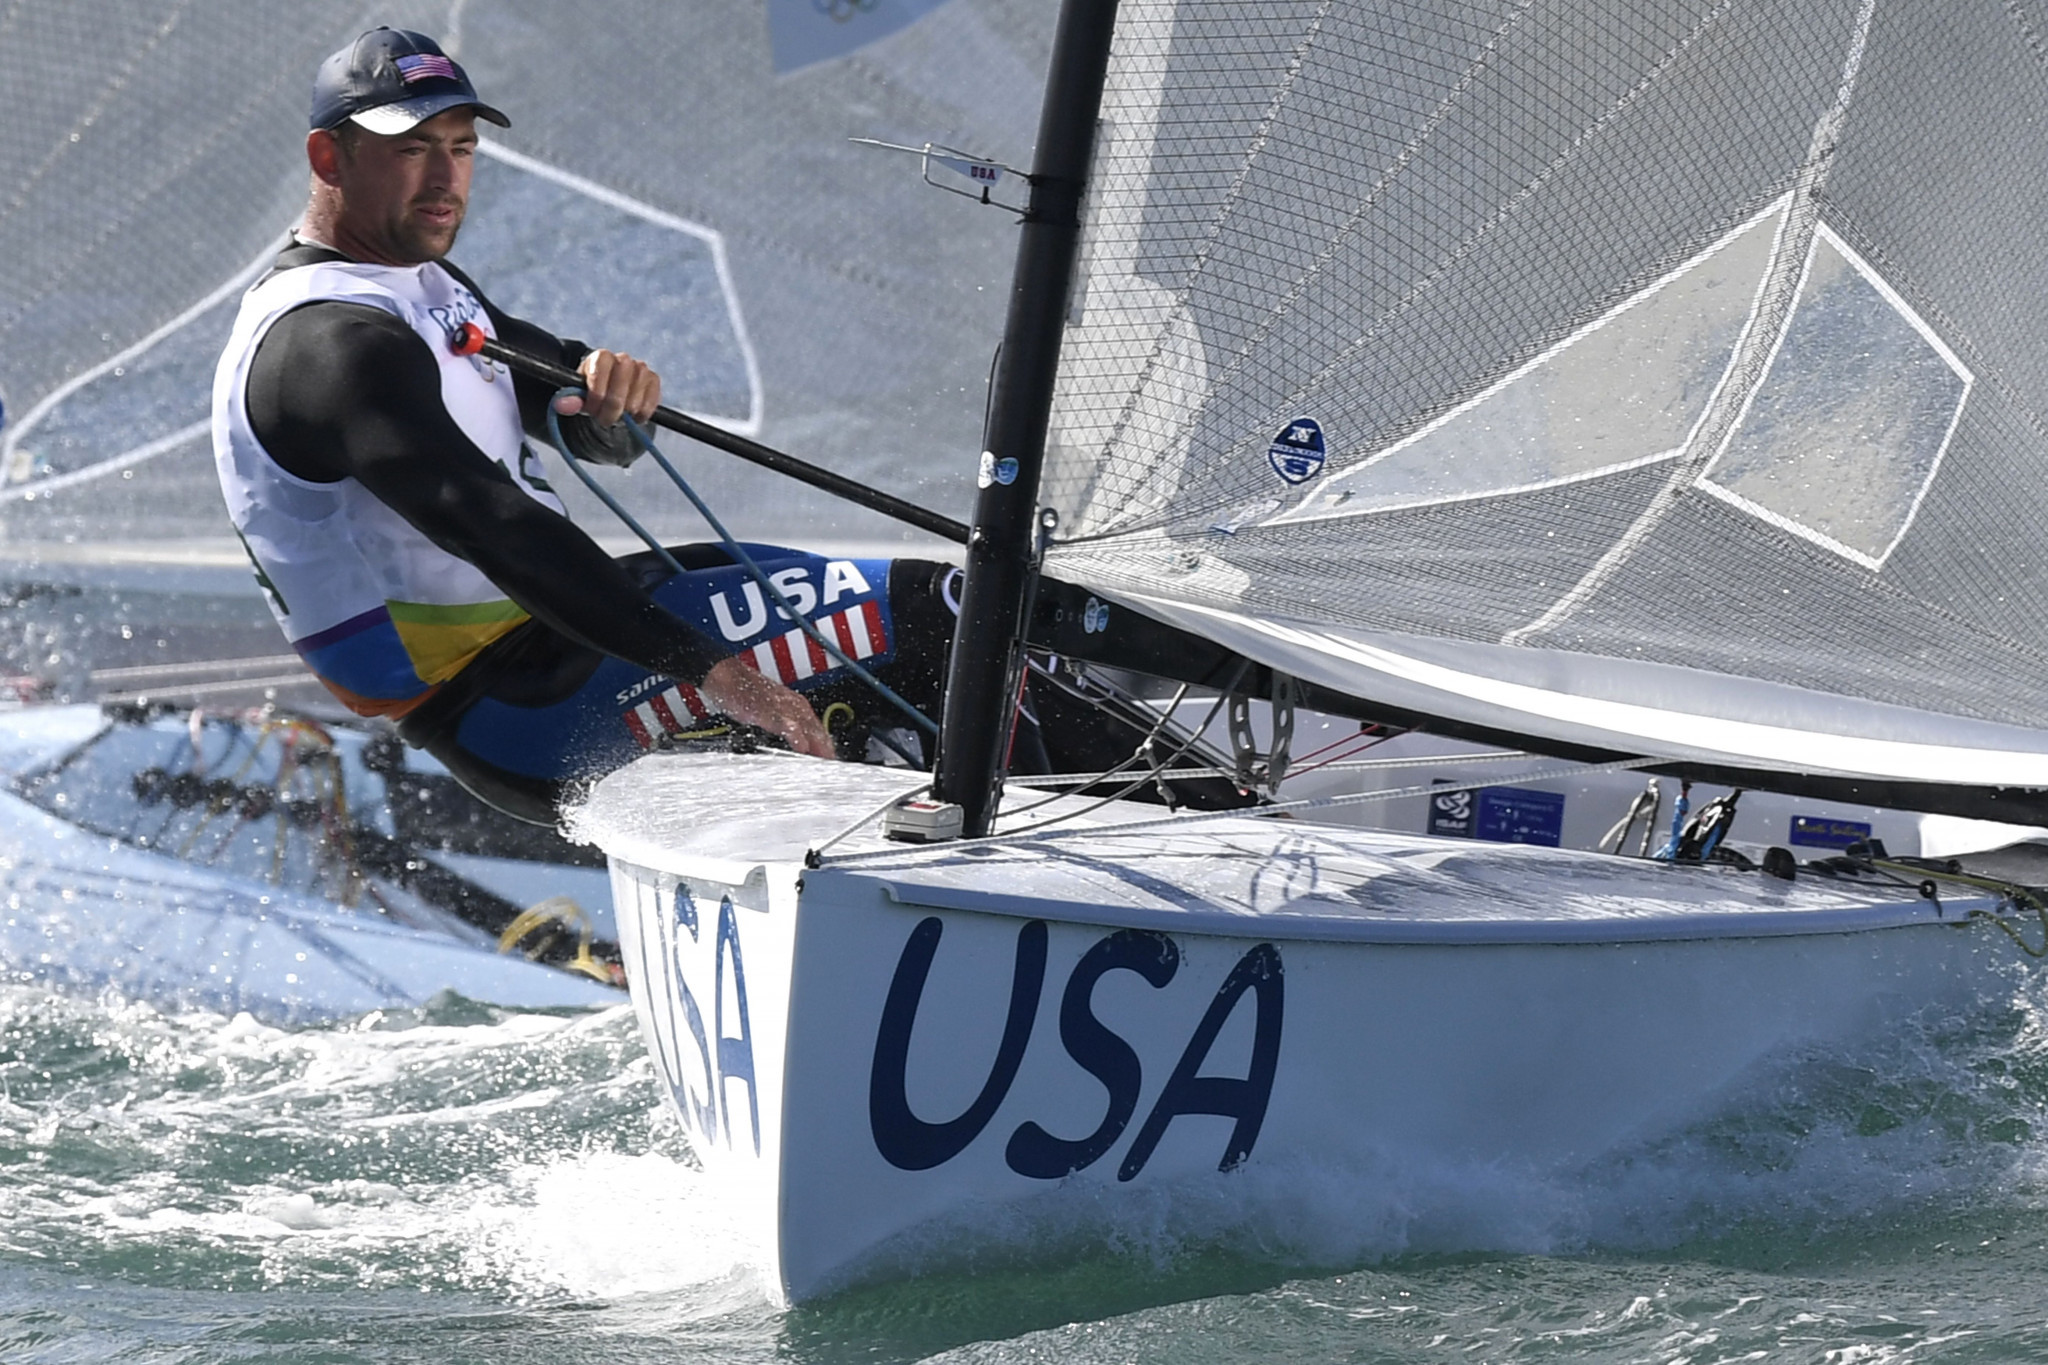 The United States are the second most successful nation in history of Olympic sailing but have not won a medal since Caleb Paine in the Finn class at Rio 2016 ©Getty Images